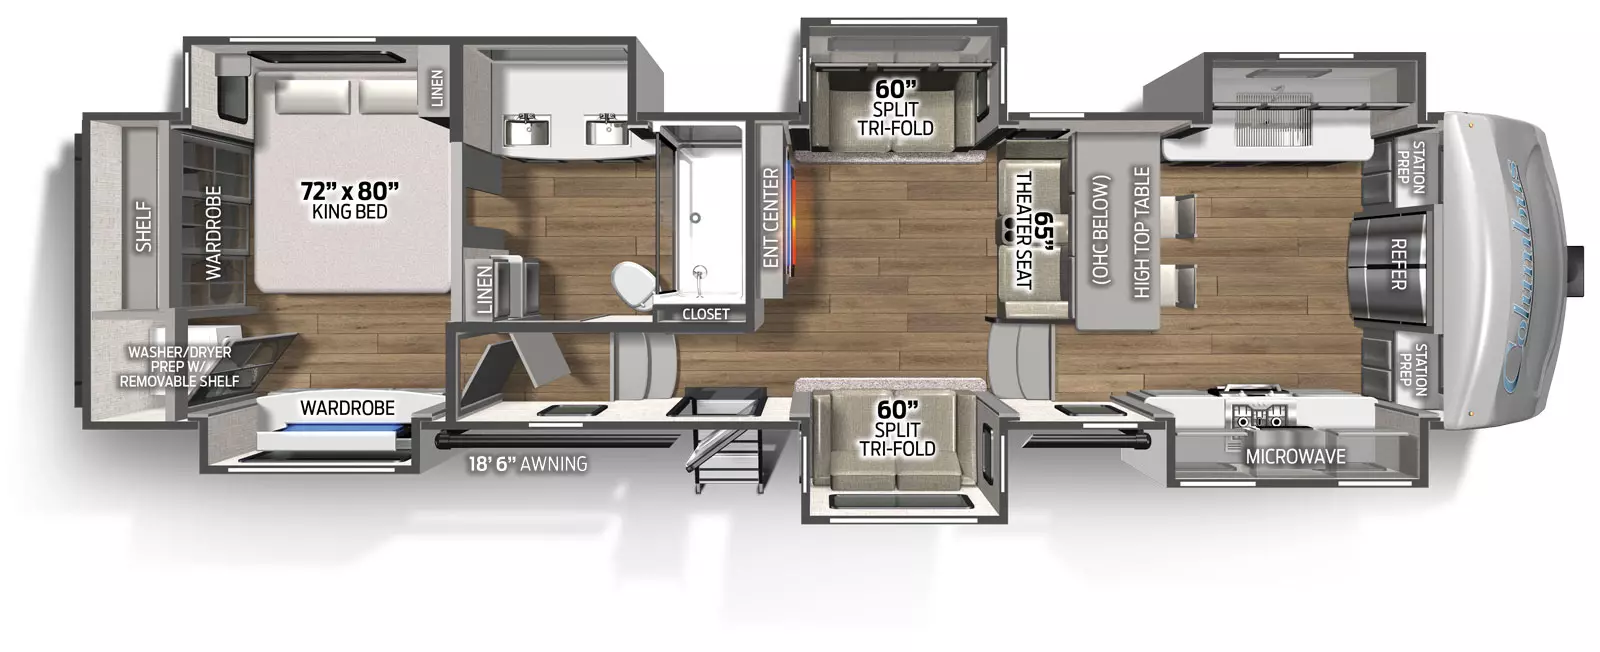 The 388FK has 5 slide outs, three on the road side and two on the camp side, along with one entry door on the camp side. Interior layout from front to back: front kitchen with residential refrigerator, road side slide out containing double basin sink, cabinets and overhead microwave; the camp side slide out containing cabinets, oven and cooktop. Living room with theater seat and entertainment center, road side slide out containing trifold sofa; camp side slide out containing trifold sofa; side aisle bathroom with road side slide out containing two sinks and cabinets; rear bedroom with king size bed in road side slide. Exterior storage below the rear bedroom.  
